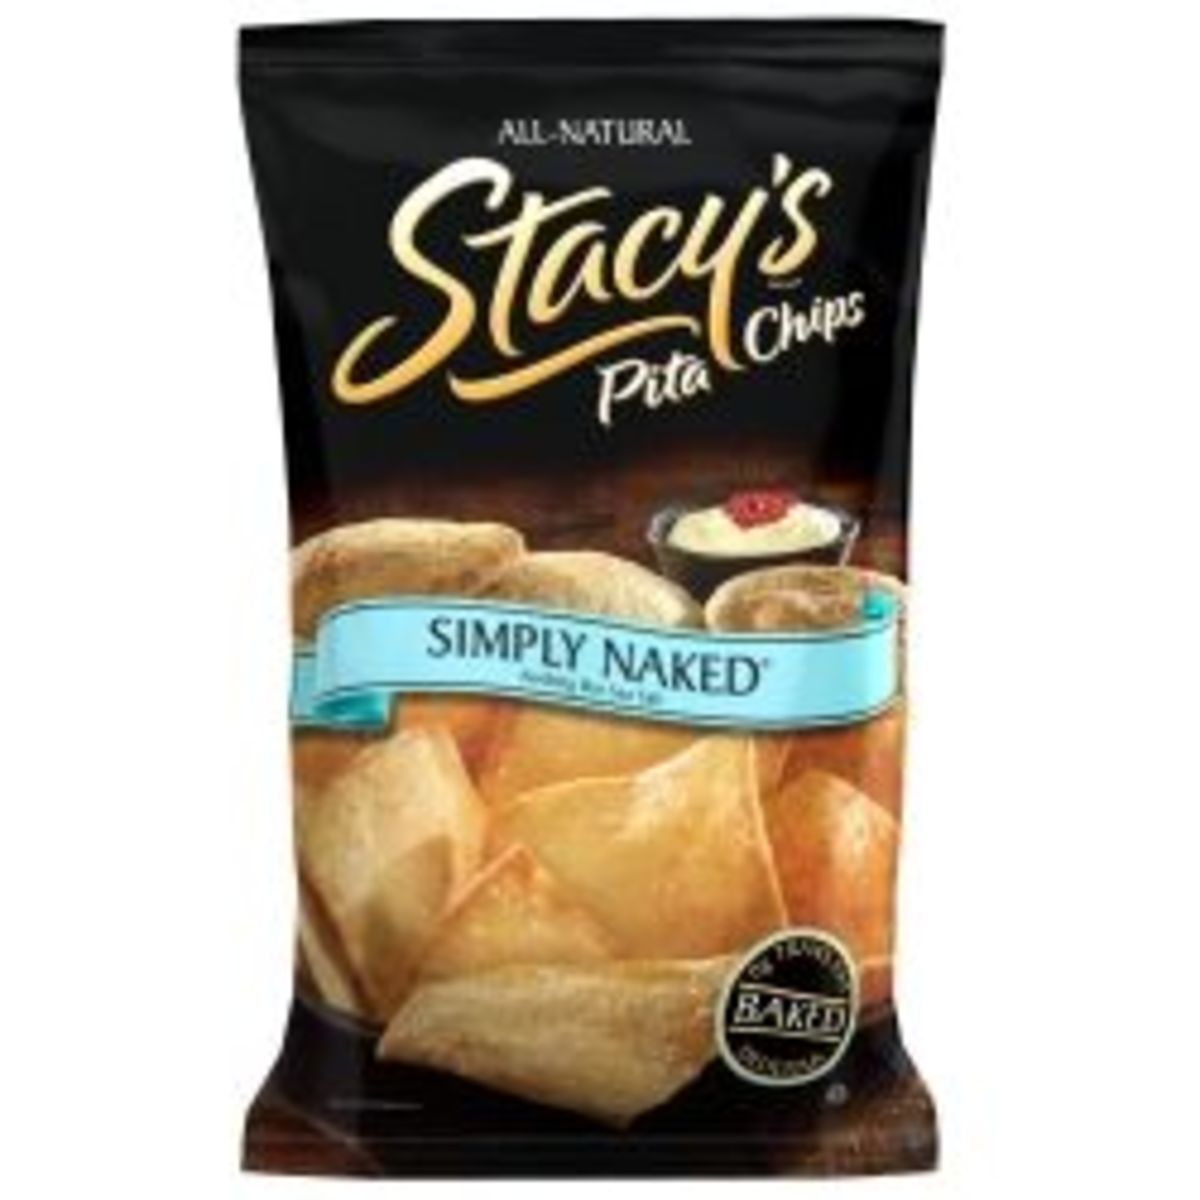 Stacy's Chips